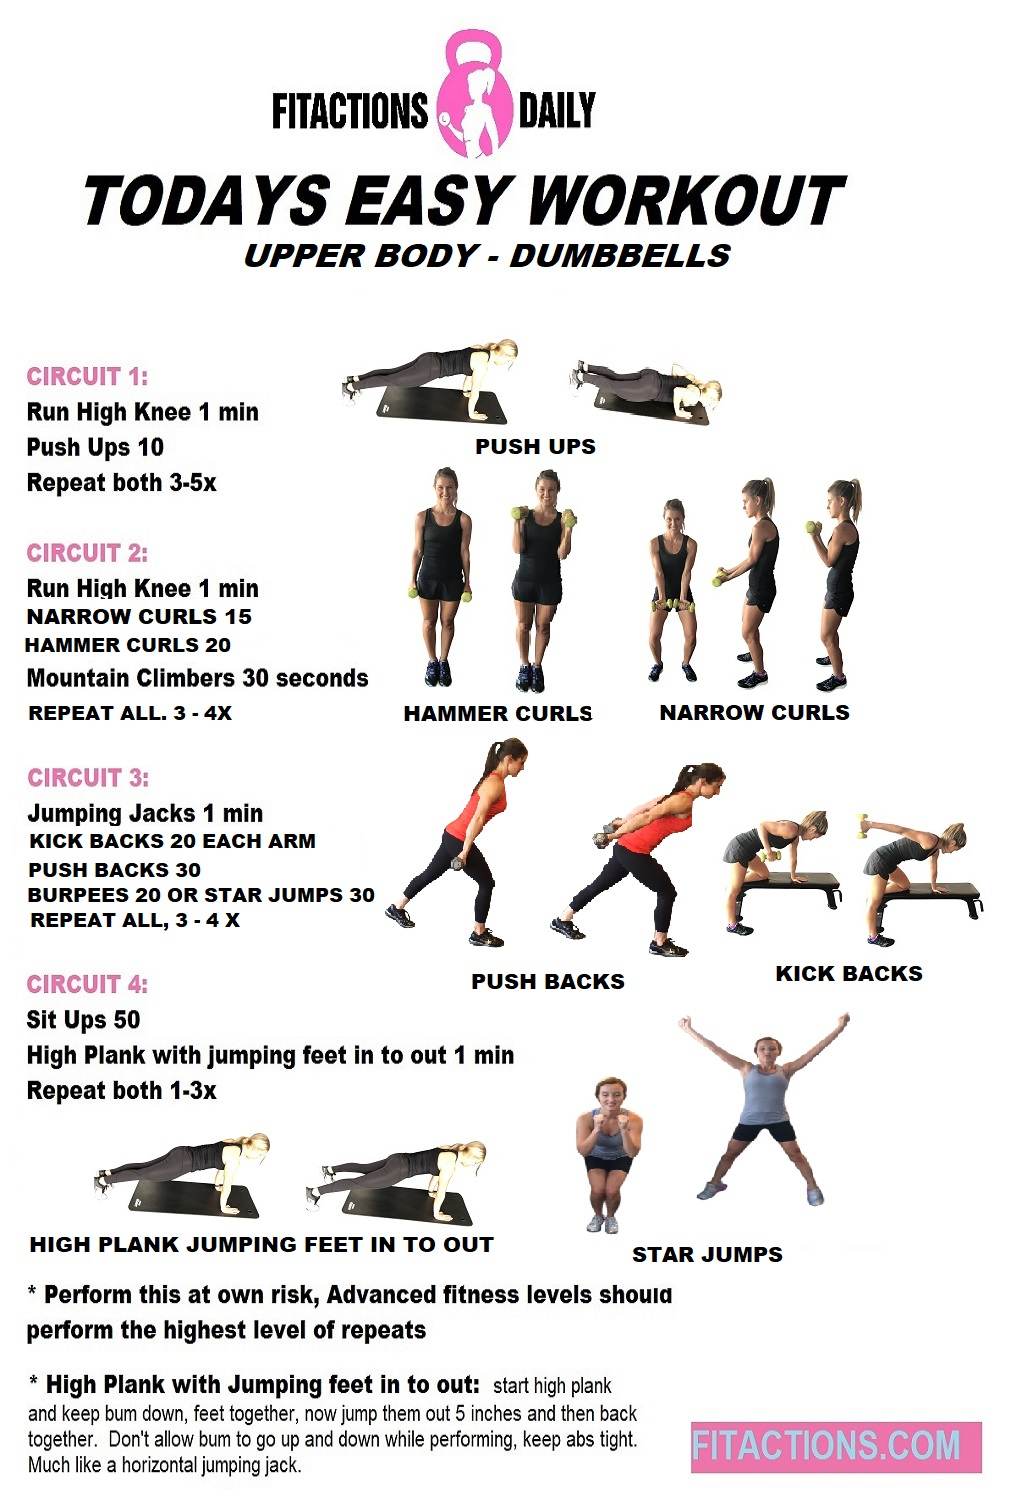 DYNAMIC UPPER BODY WORKOUT FOR WOMEN l FITACTIONS